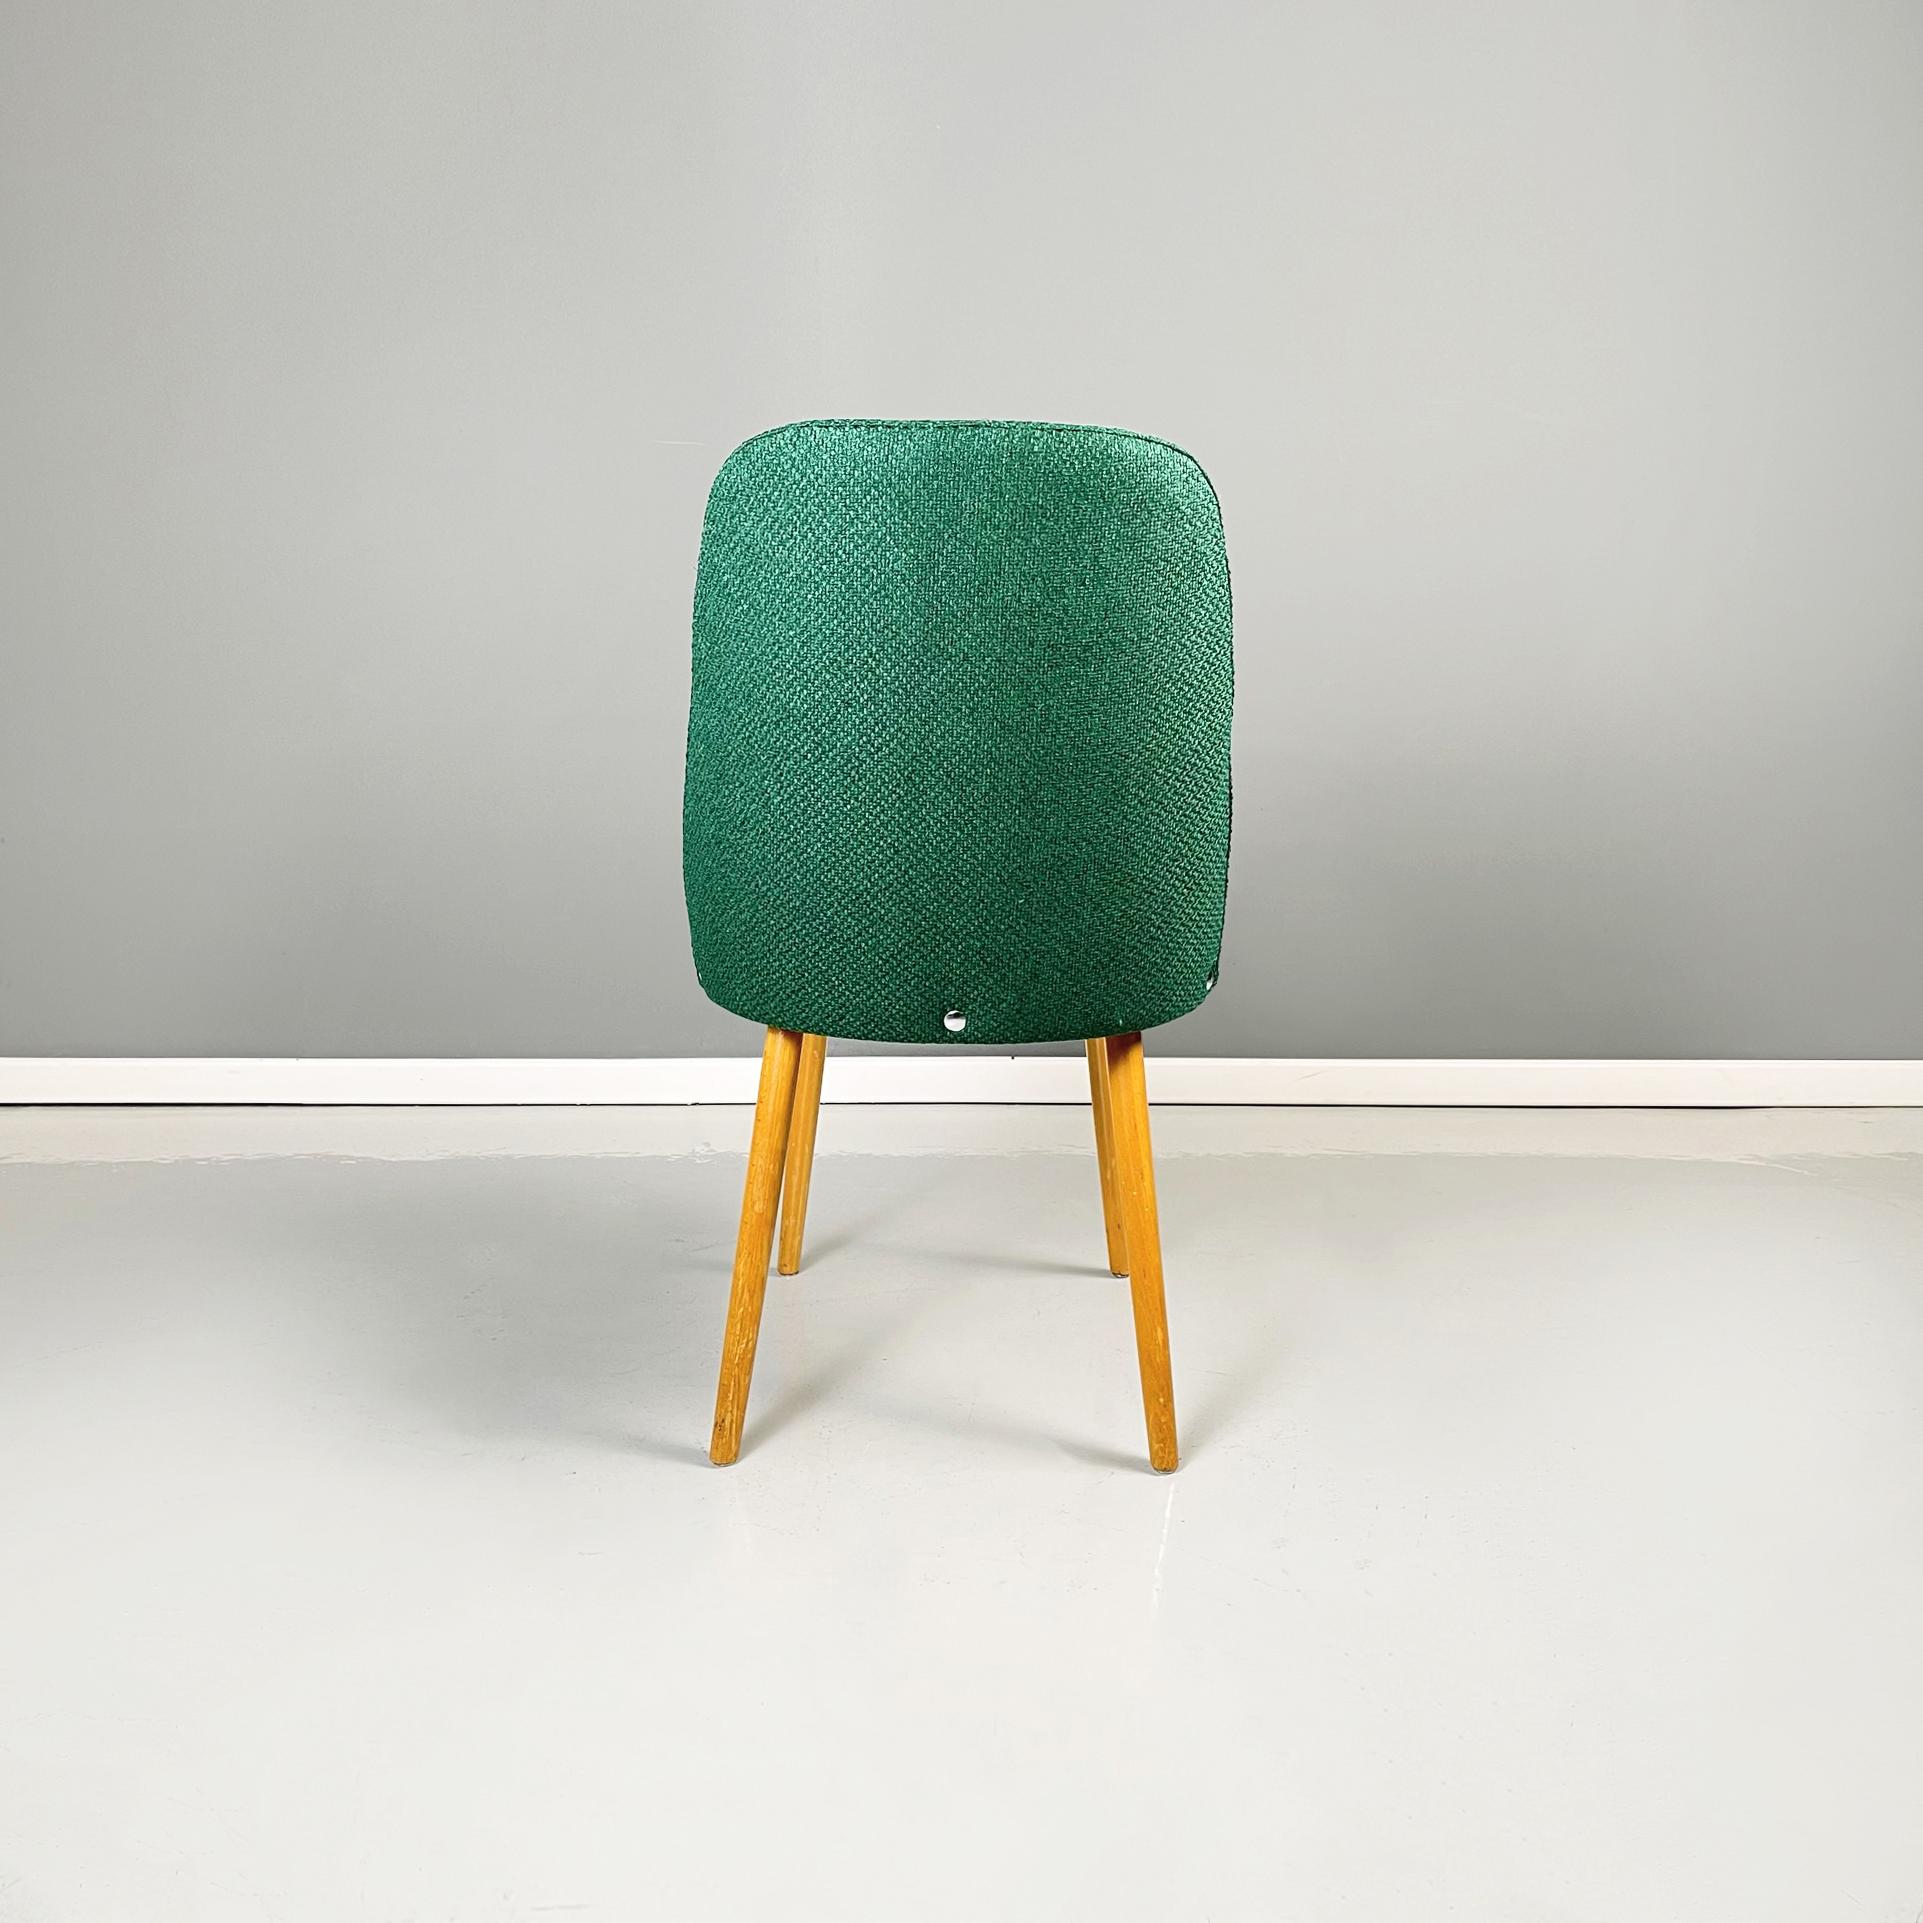 Italian Mid-Century Modern Chairs in Forest Green Fabric and Wood, 1960s For Sale 2